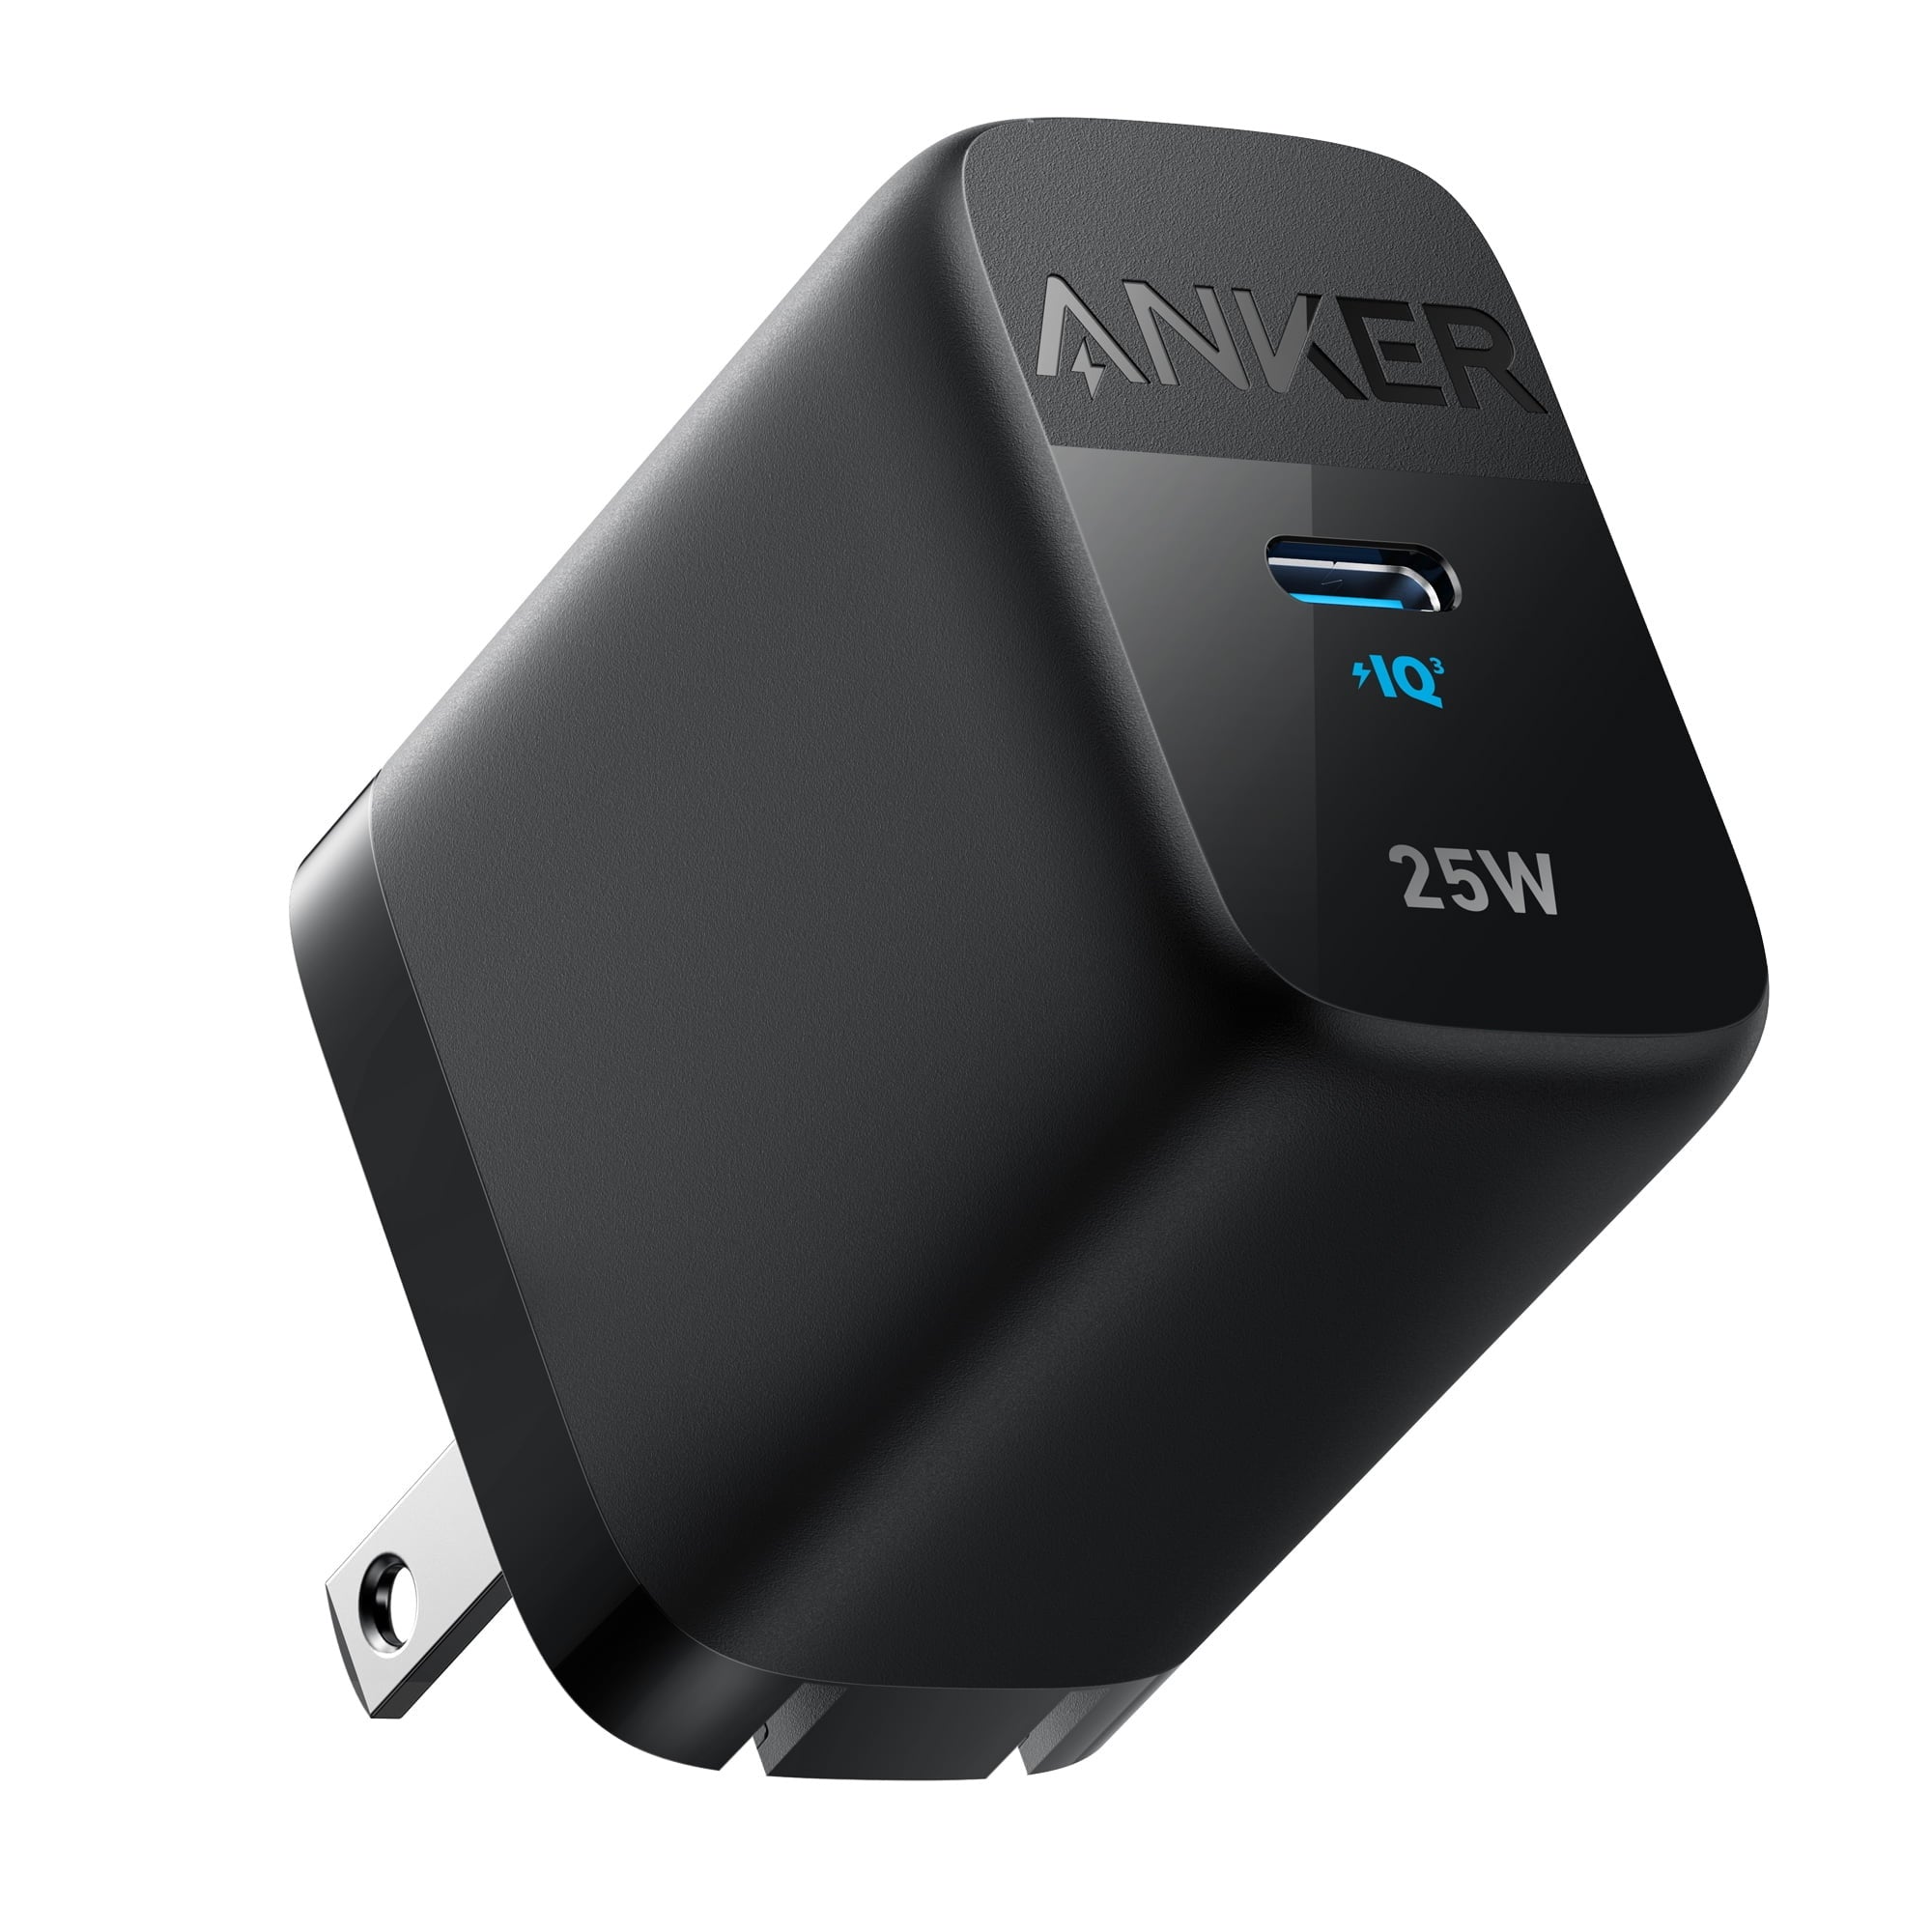 Anker 312 usb-c charger (Ace 2 ,25w)